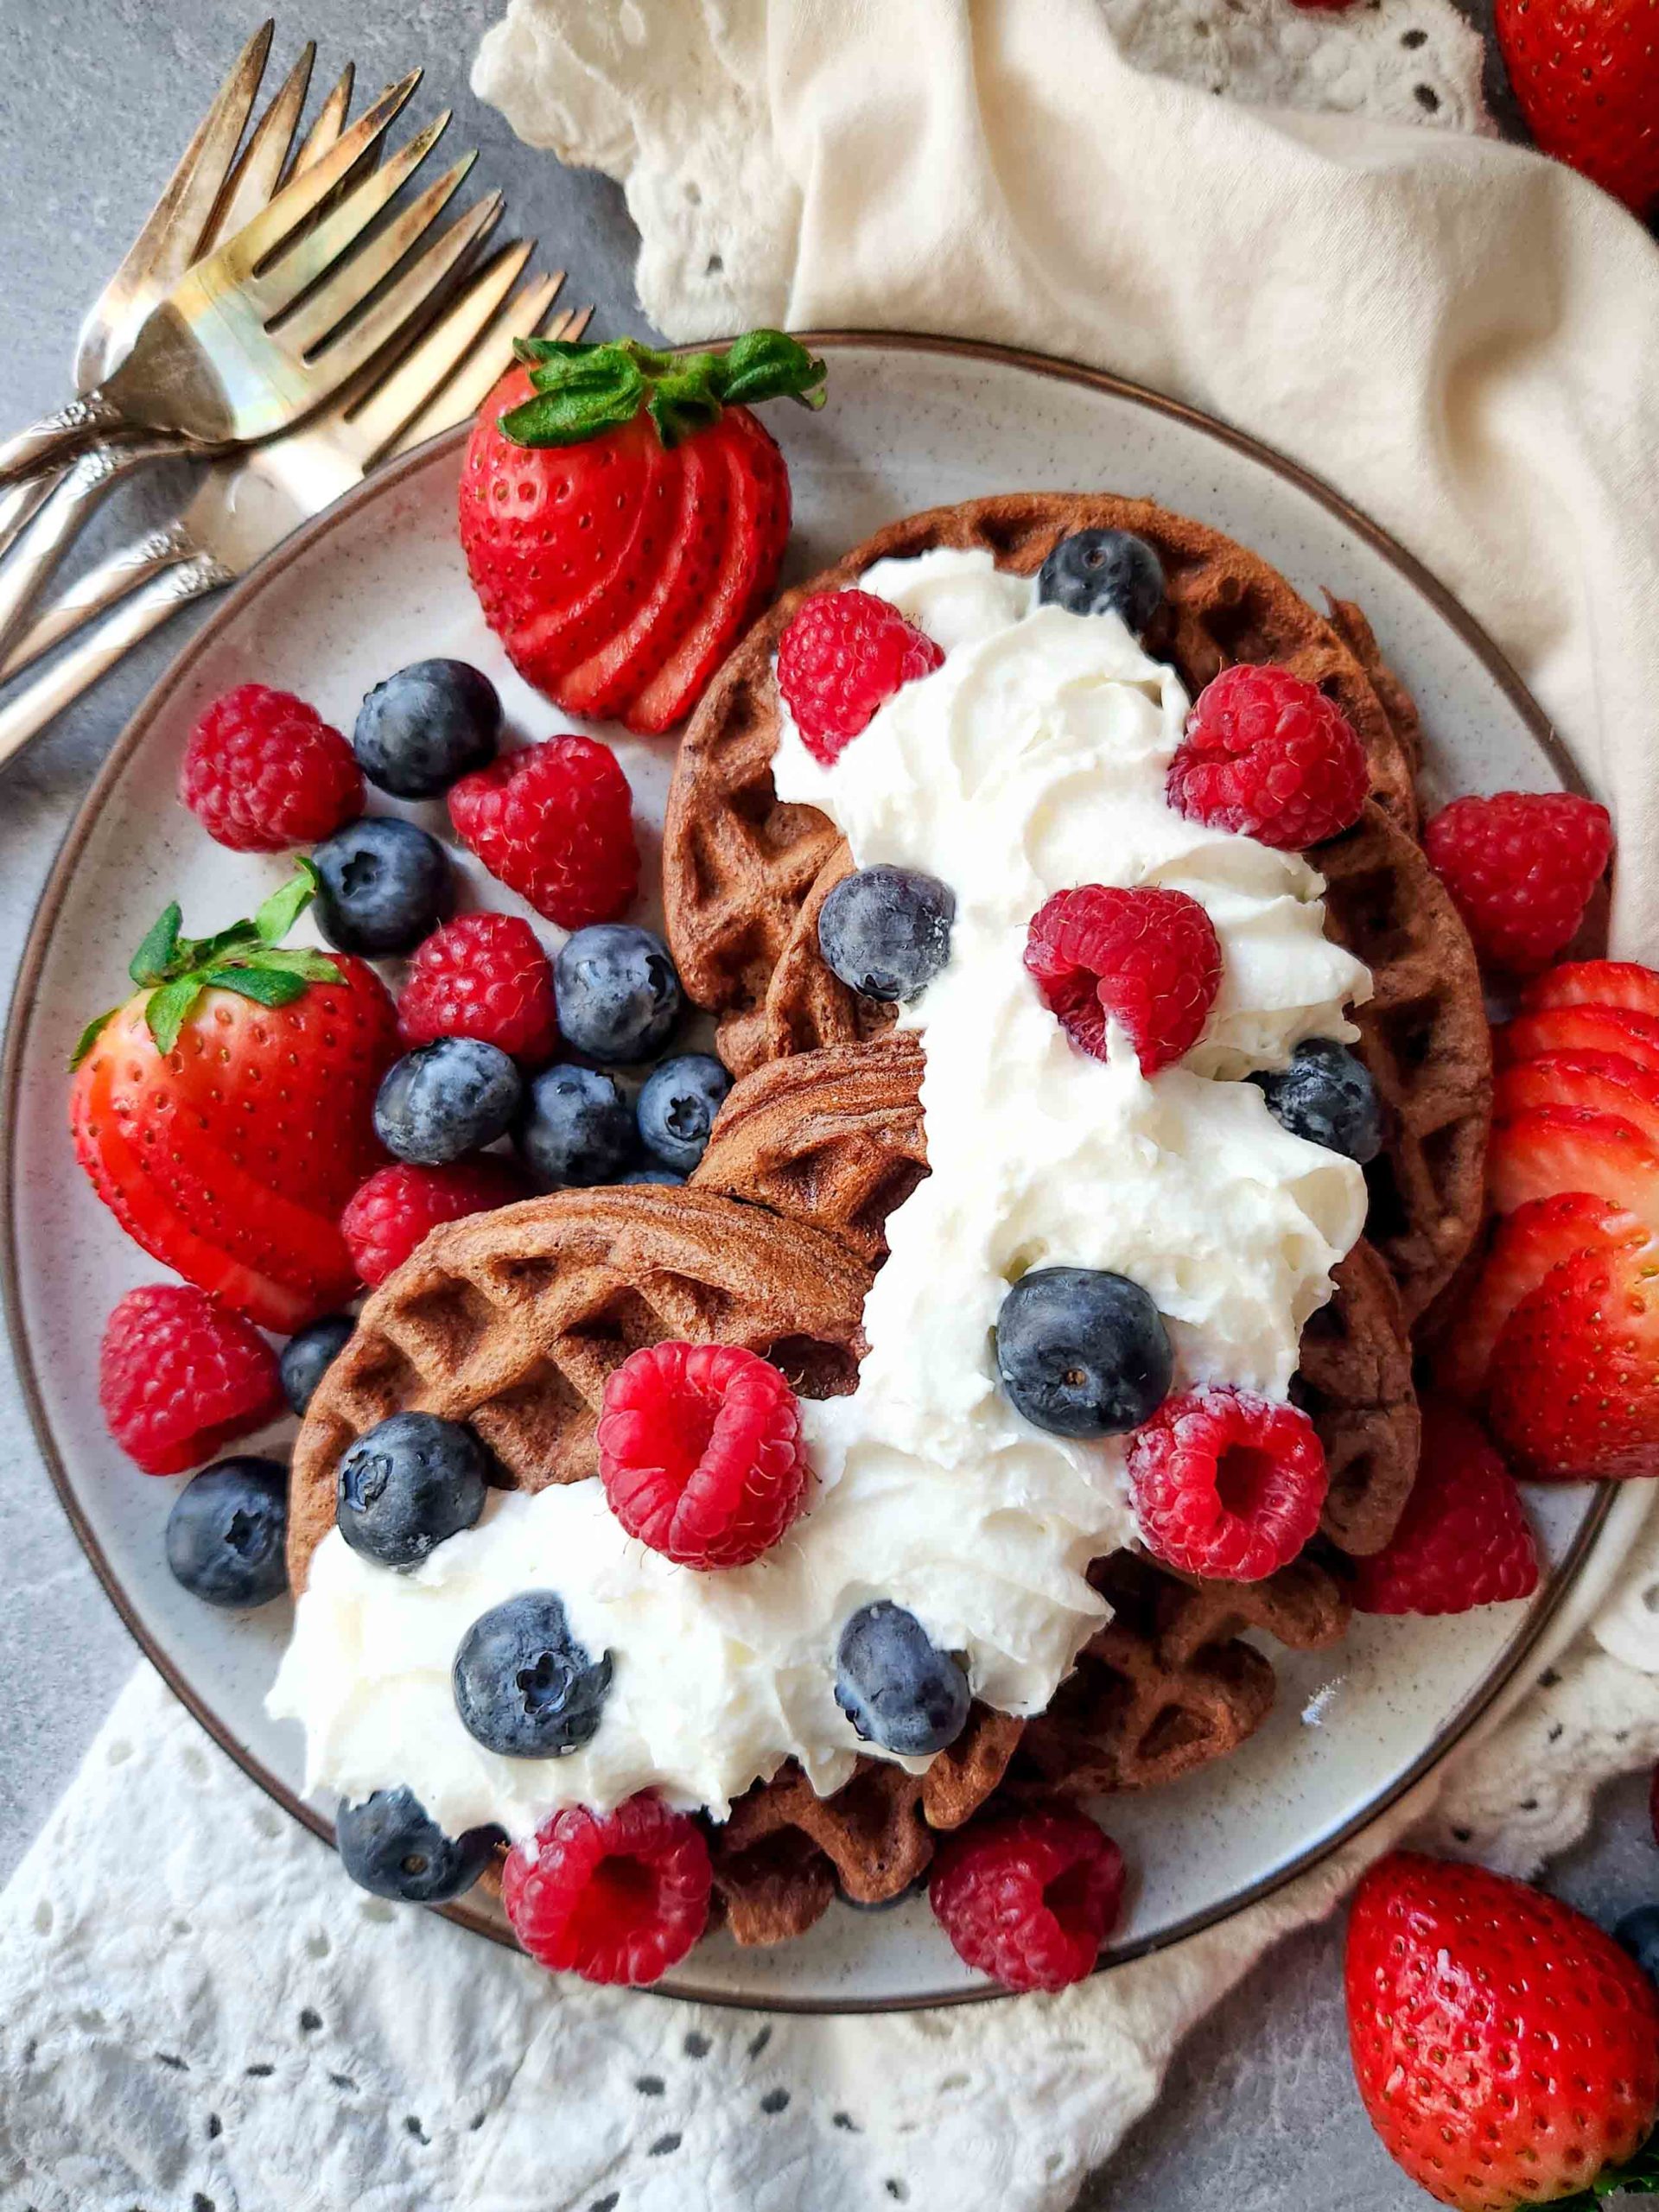 https://thereislifeafterwheat.com/wp-content/uploads/2023/02/Gluten-Free-Chocolate-Waffles-11-scaled.jpg